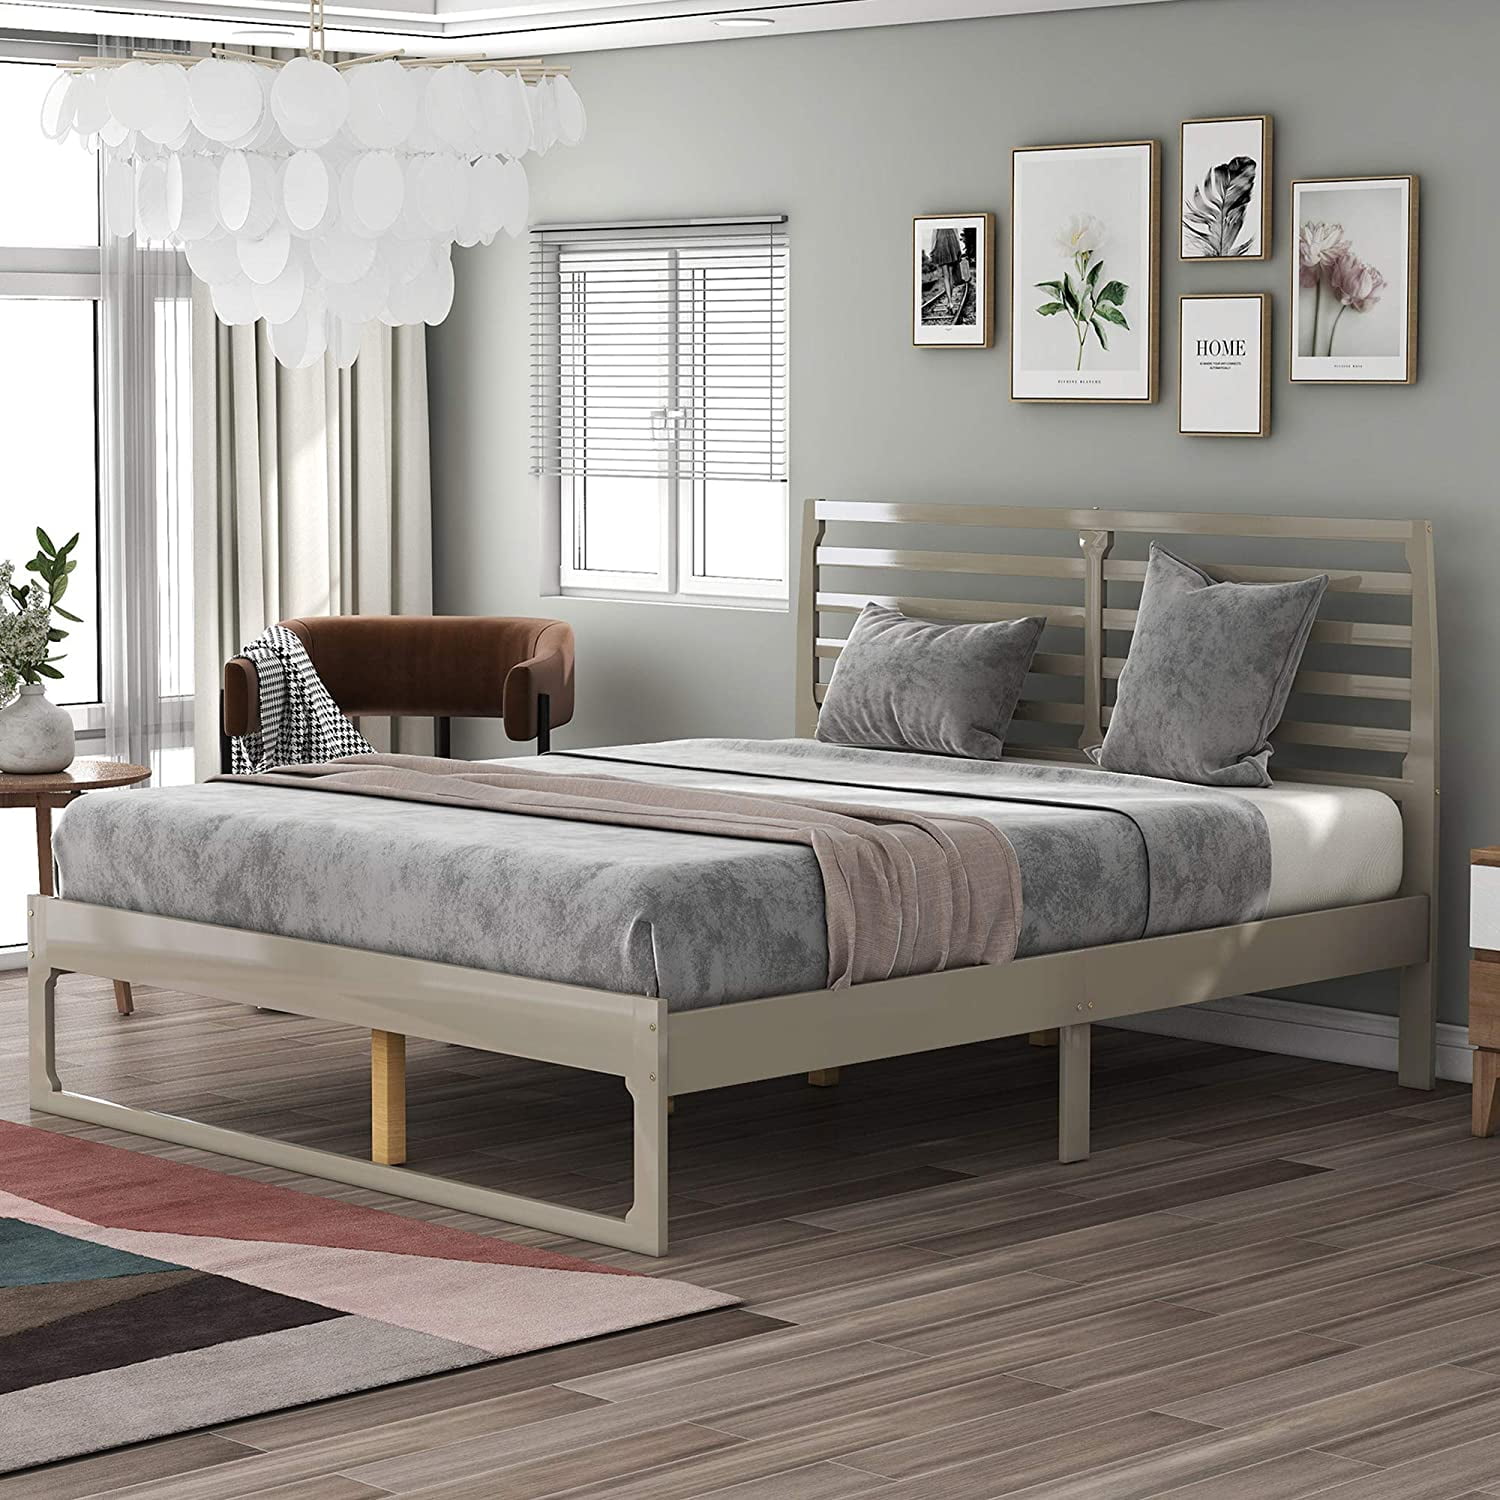 Piscis Wood Platform Bed King Size, King Size Wooden Bed Frame With Headboard